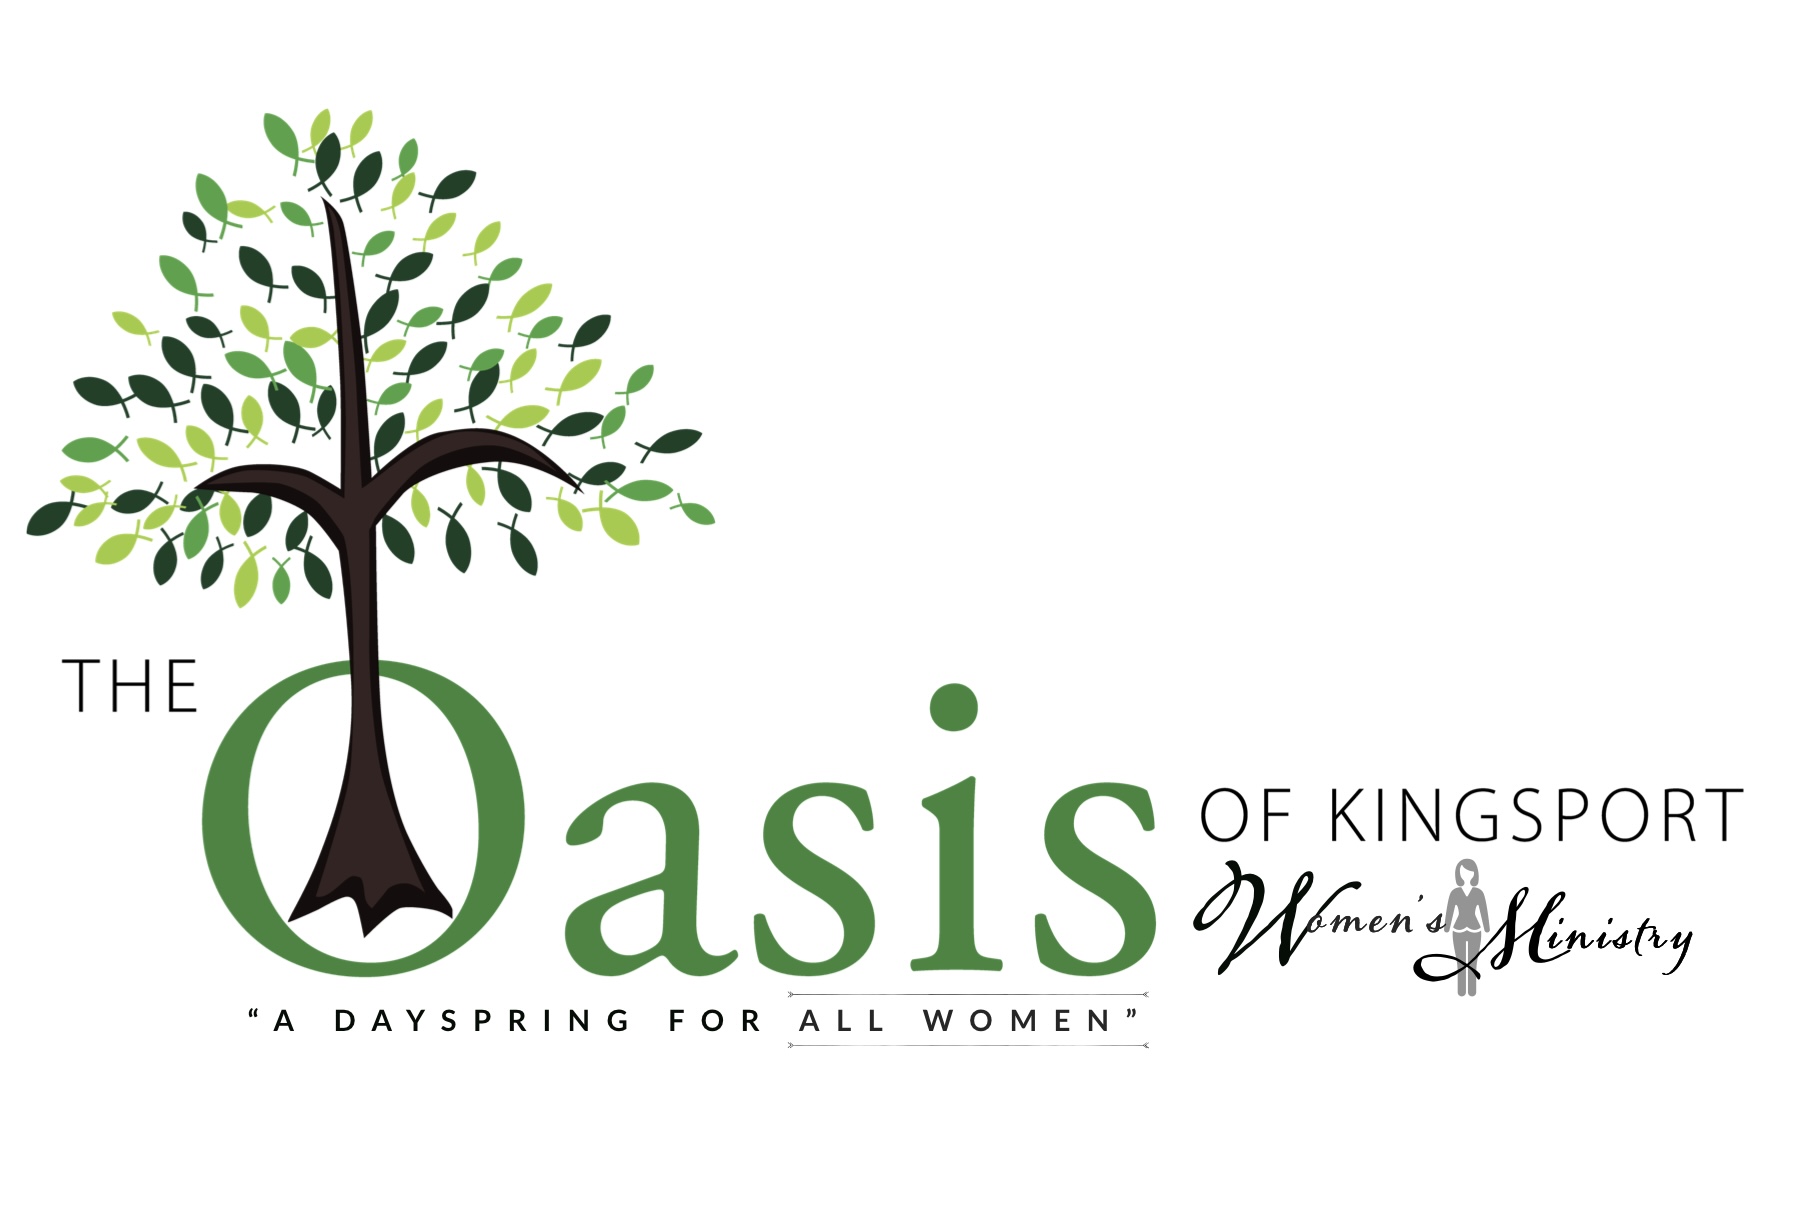 Oasis of Kingsport